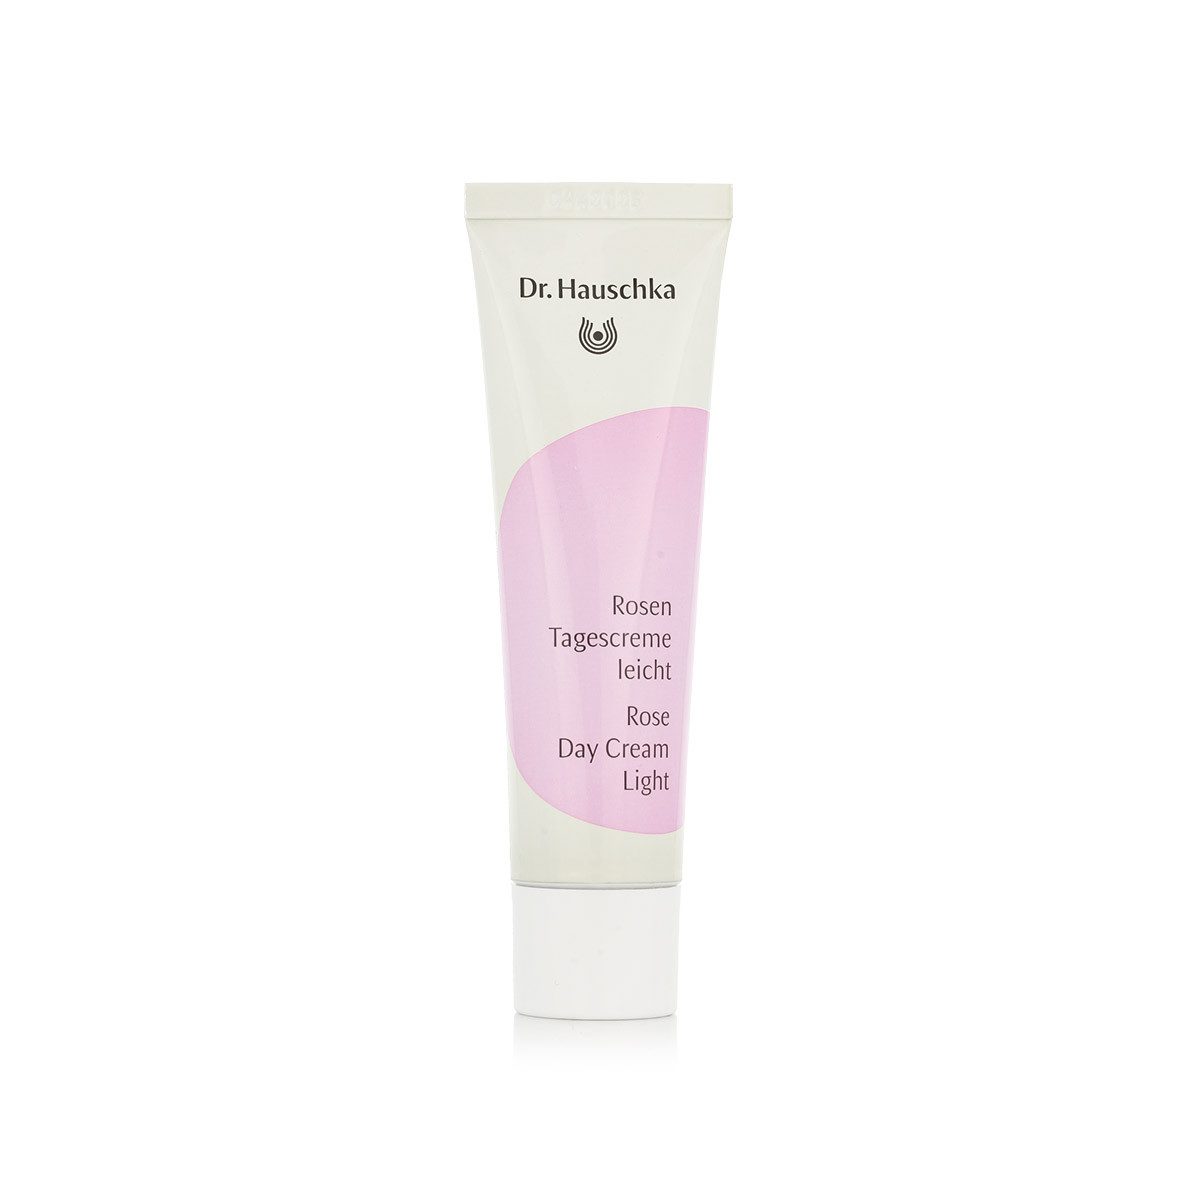 Dr. Hauschka Tagescreme Face Care